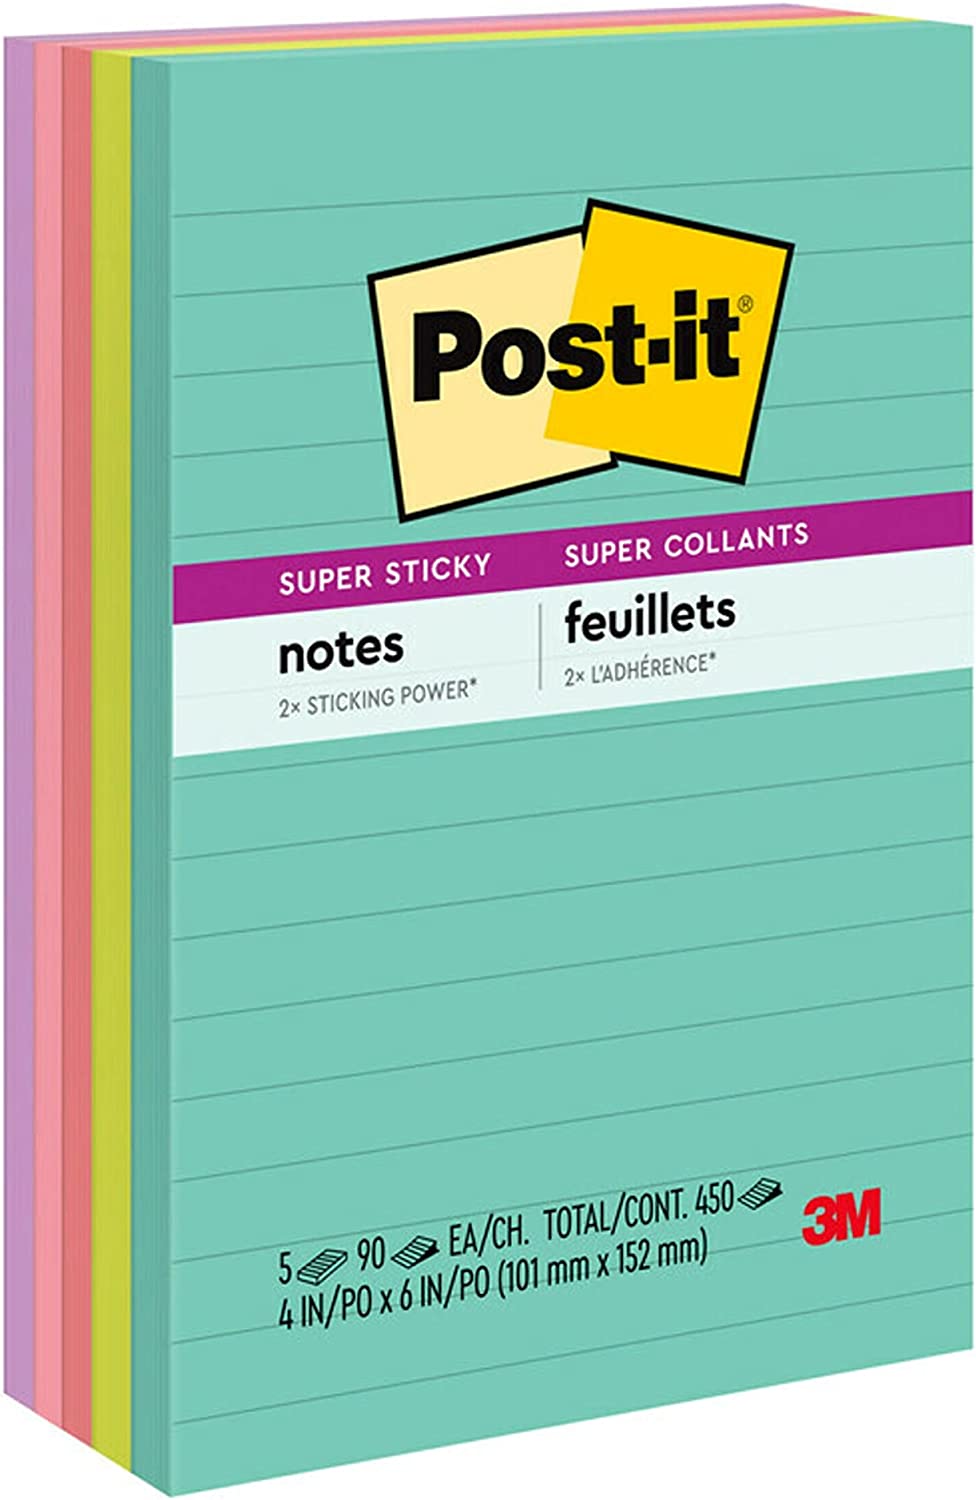 ''POST-IT Super Sticky NOTES, 4x6 in, 5 Pads, 2x the Sticking Power, Supernova Neons, Bright Colors, 